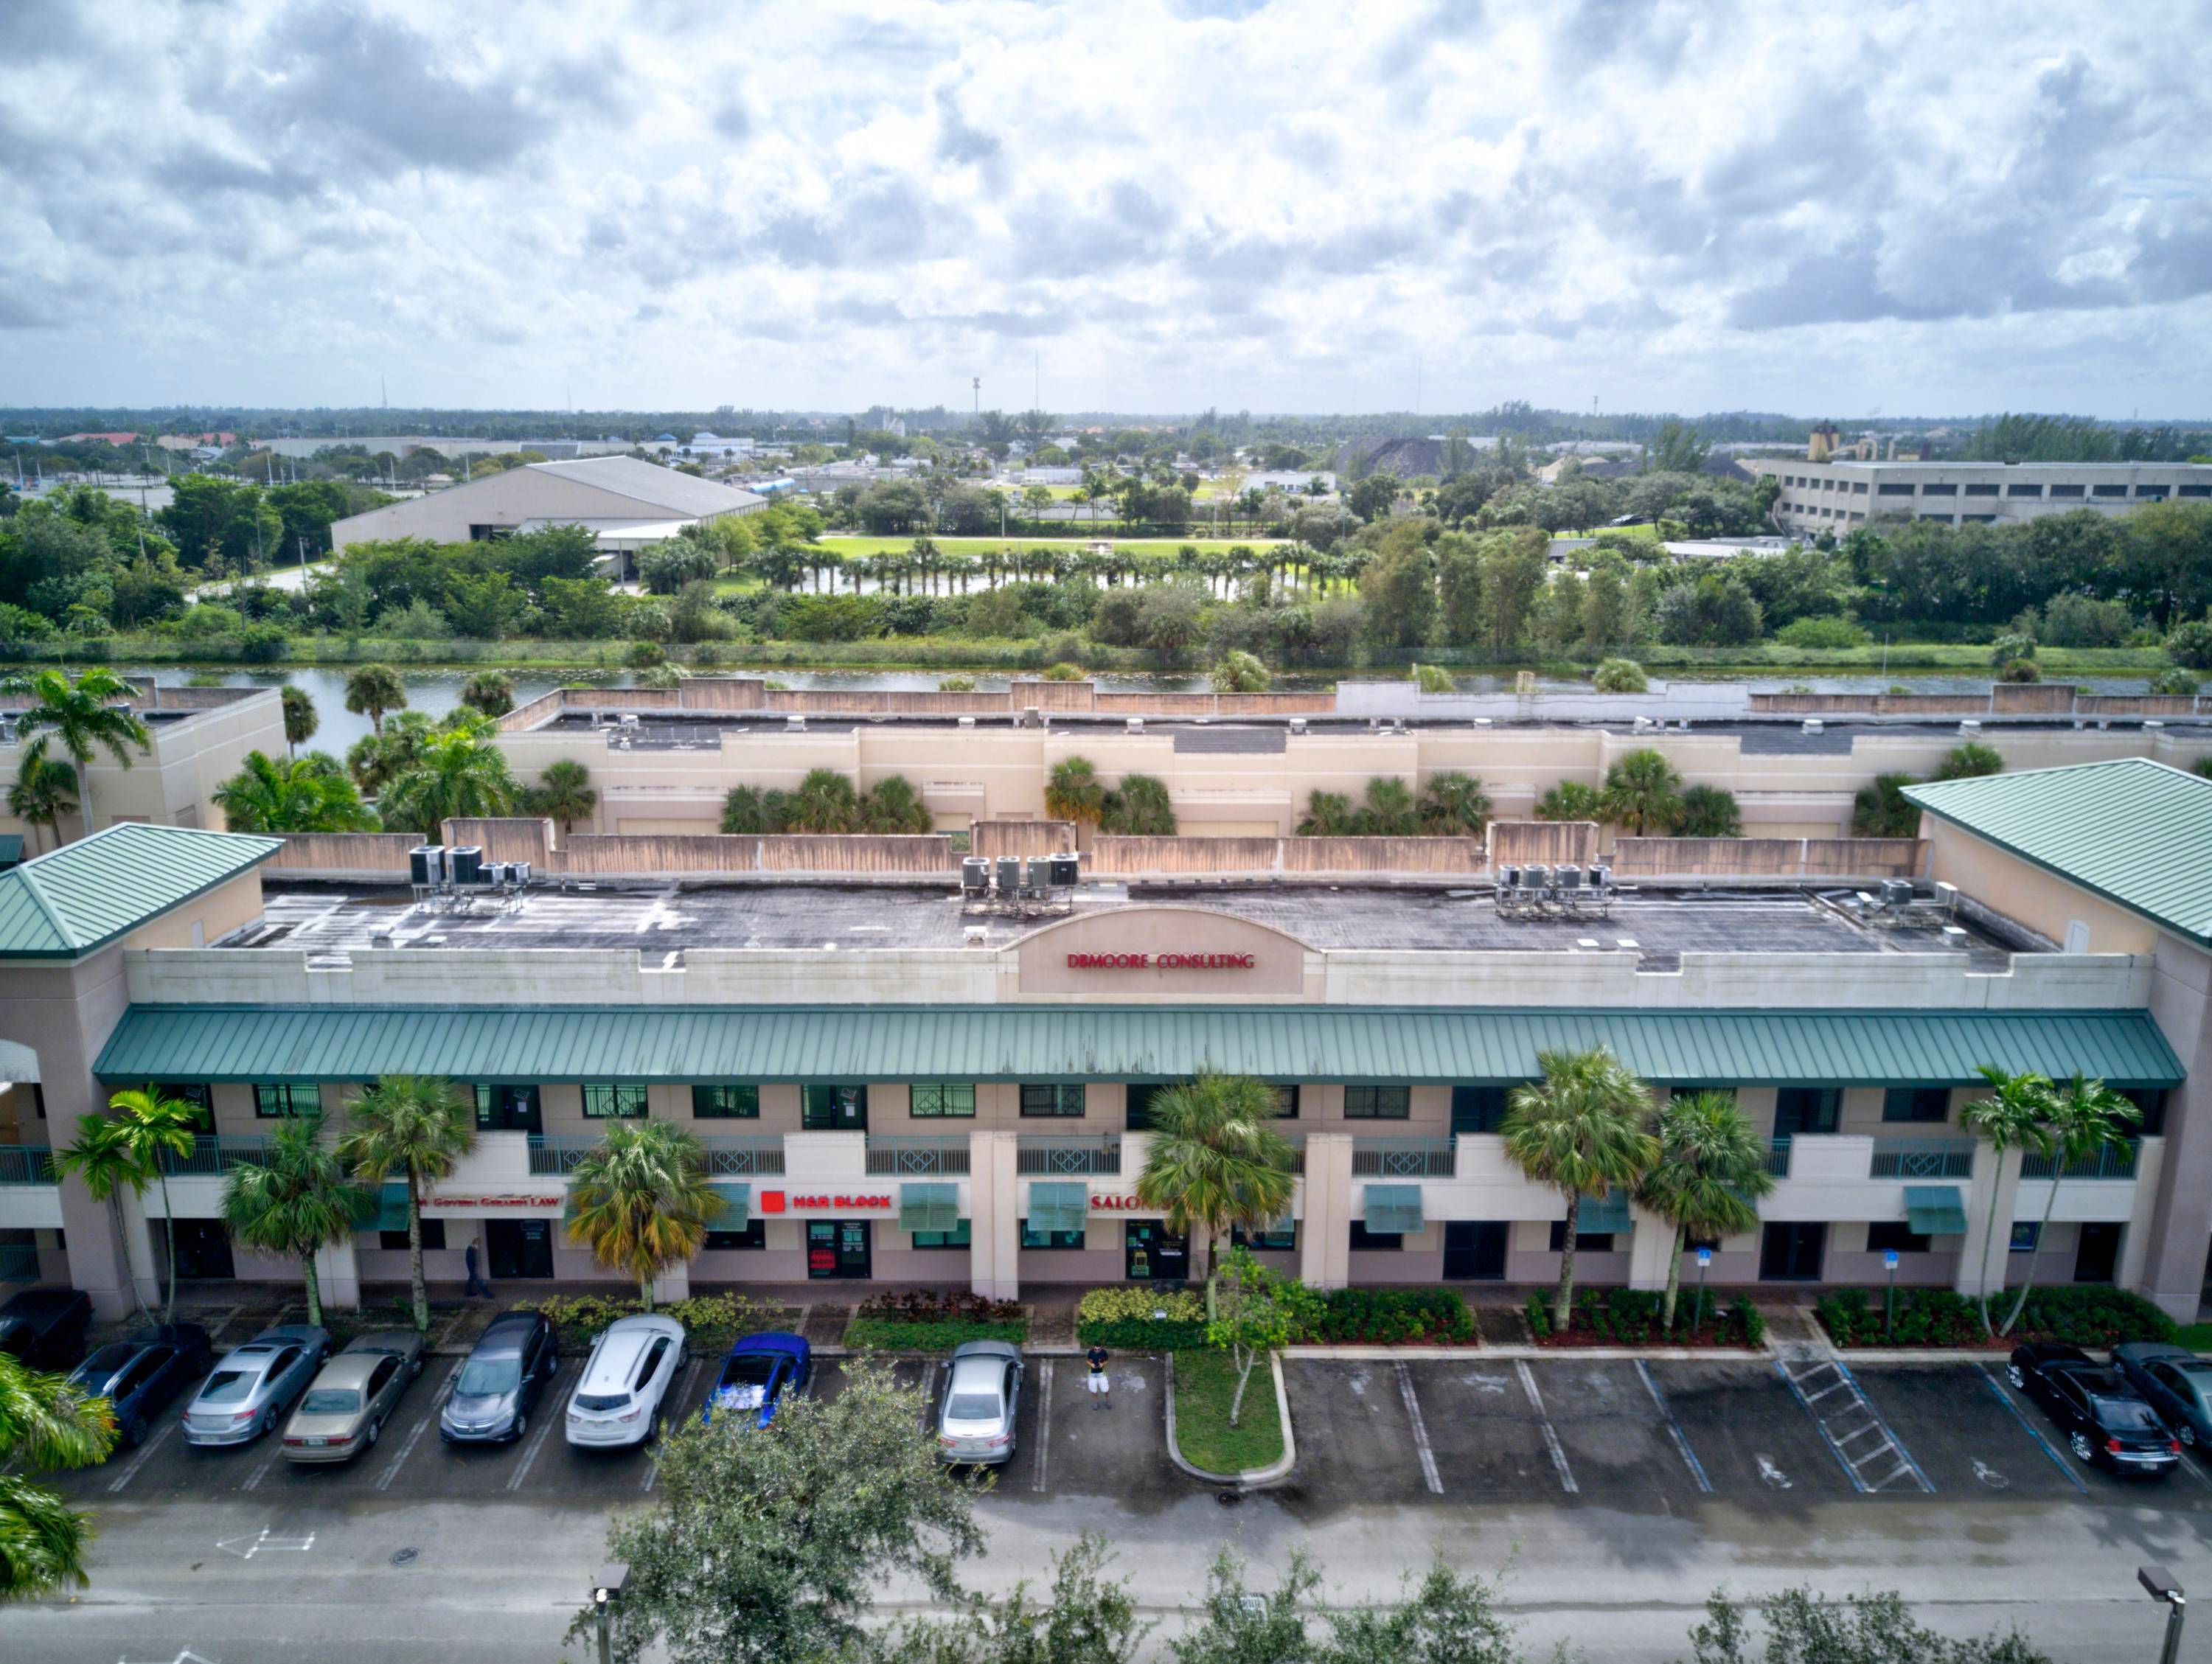 Office suite for sale at Royal Palm Business Plaza Condominium Association in Royal Palm Beach, FLThis unit is priced at 195, 000 in a Vanilla Shell Condition Vanilla Shell includes ...